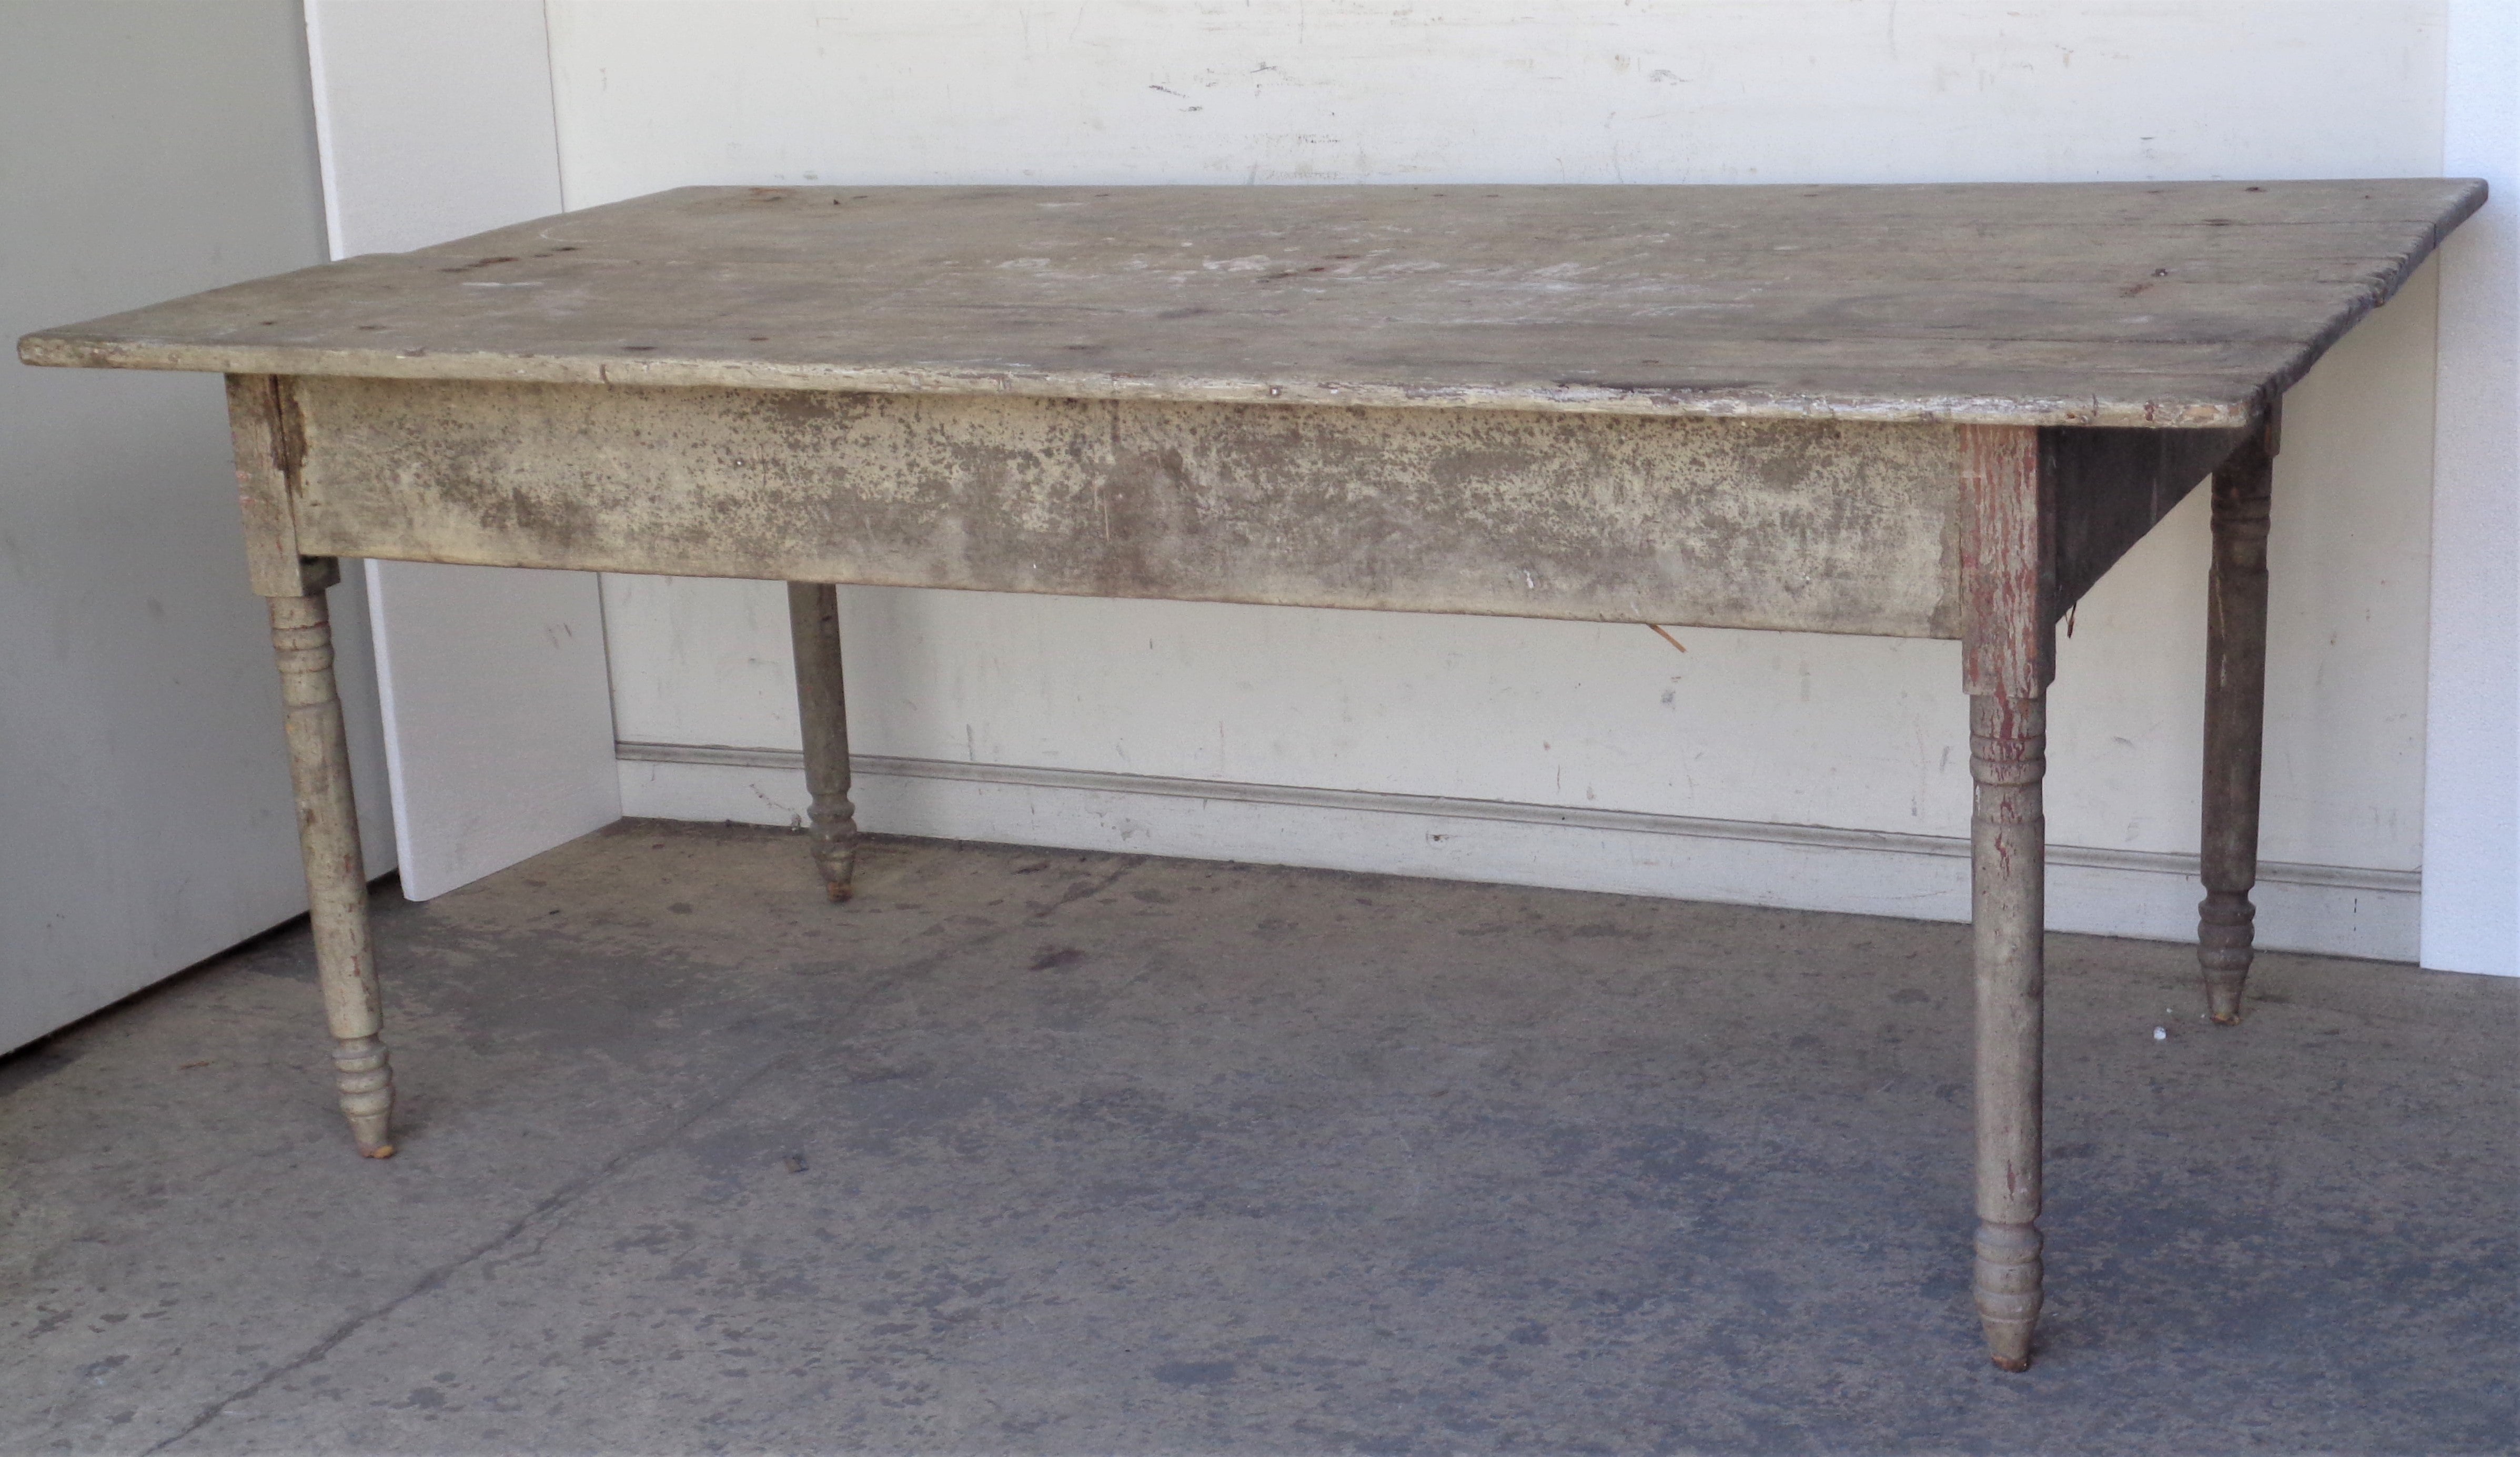 Antique American country farm table with turned legs / wide two board top in overall beautifully aged original worn old pale putty colored dry painted surface showing some underlying red wash at legs. All original early construction / large hand cut